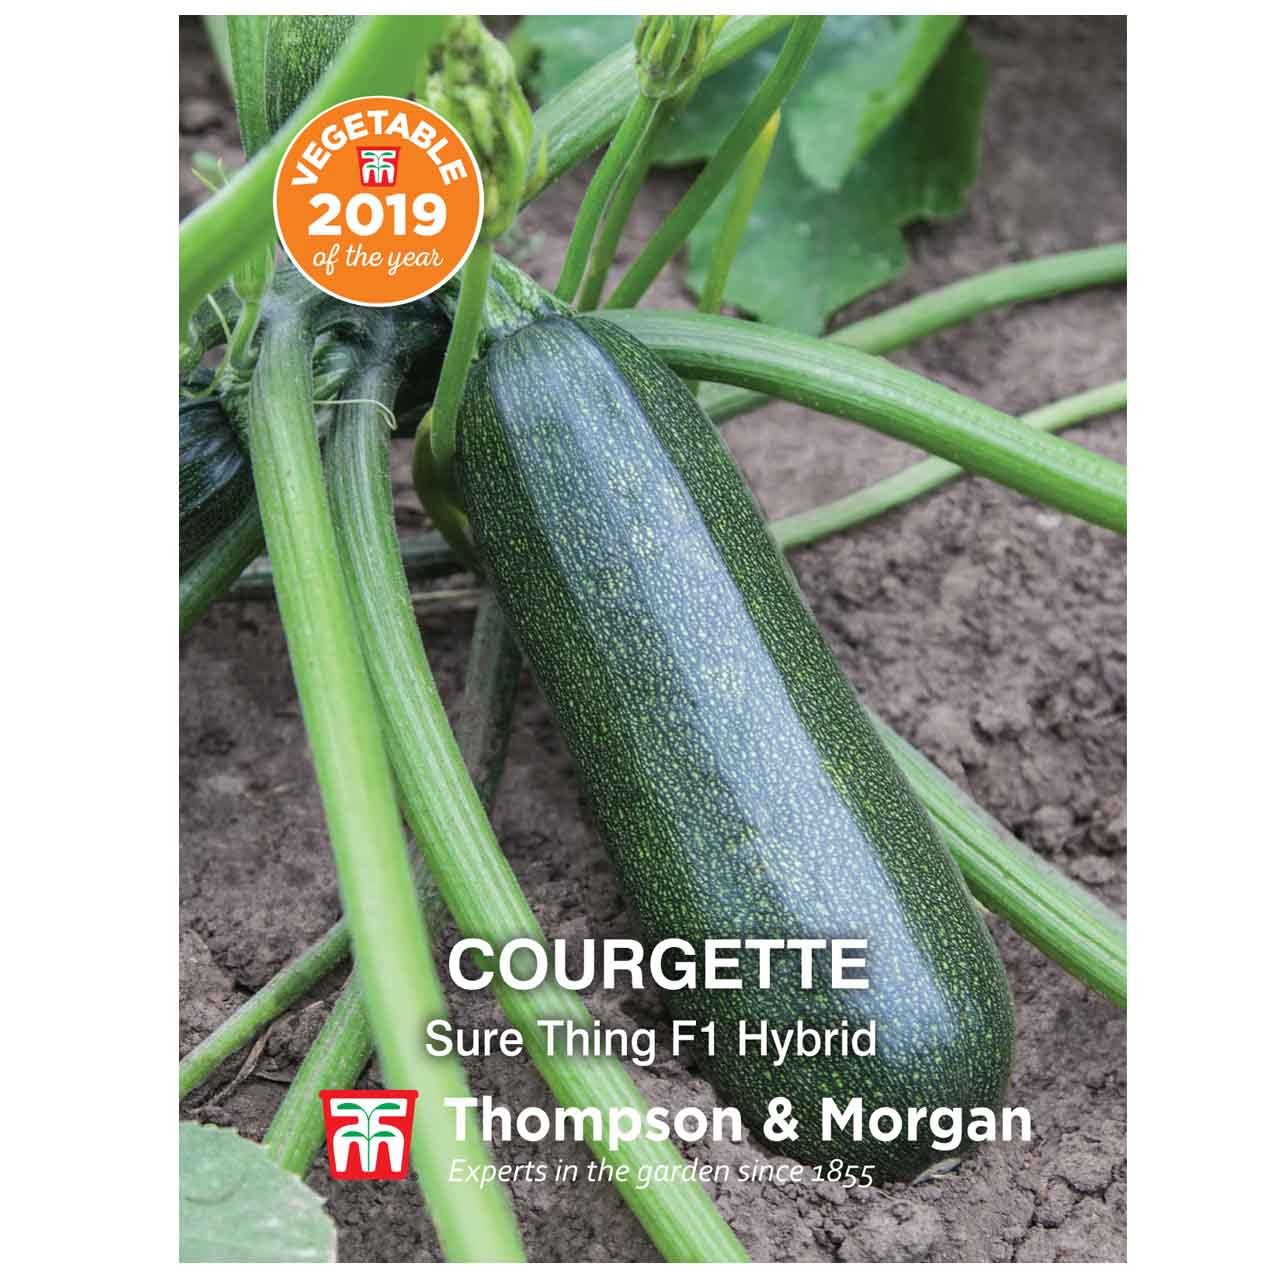 Courgette (Sure Thing F1 Hybrid)